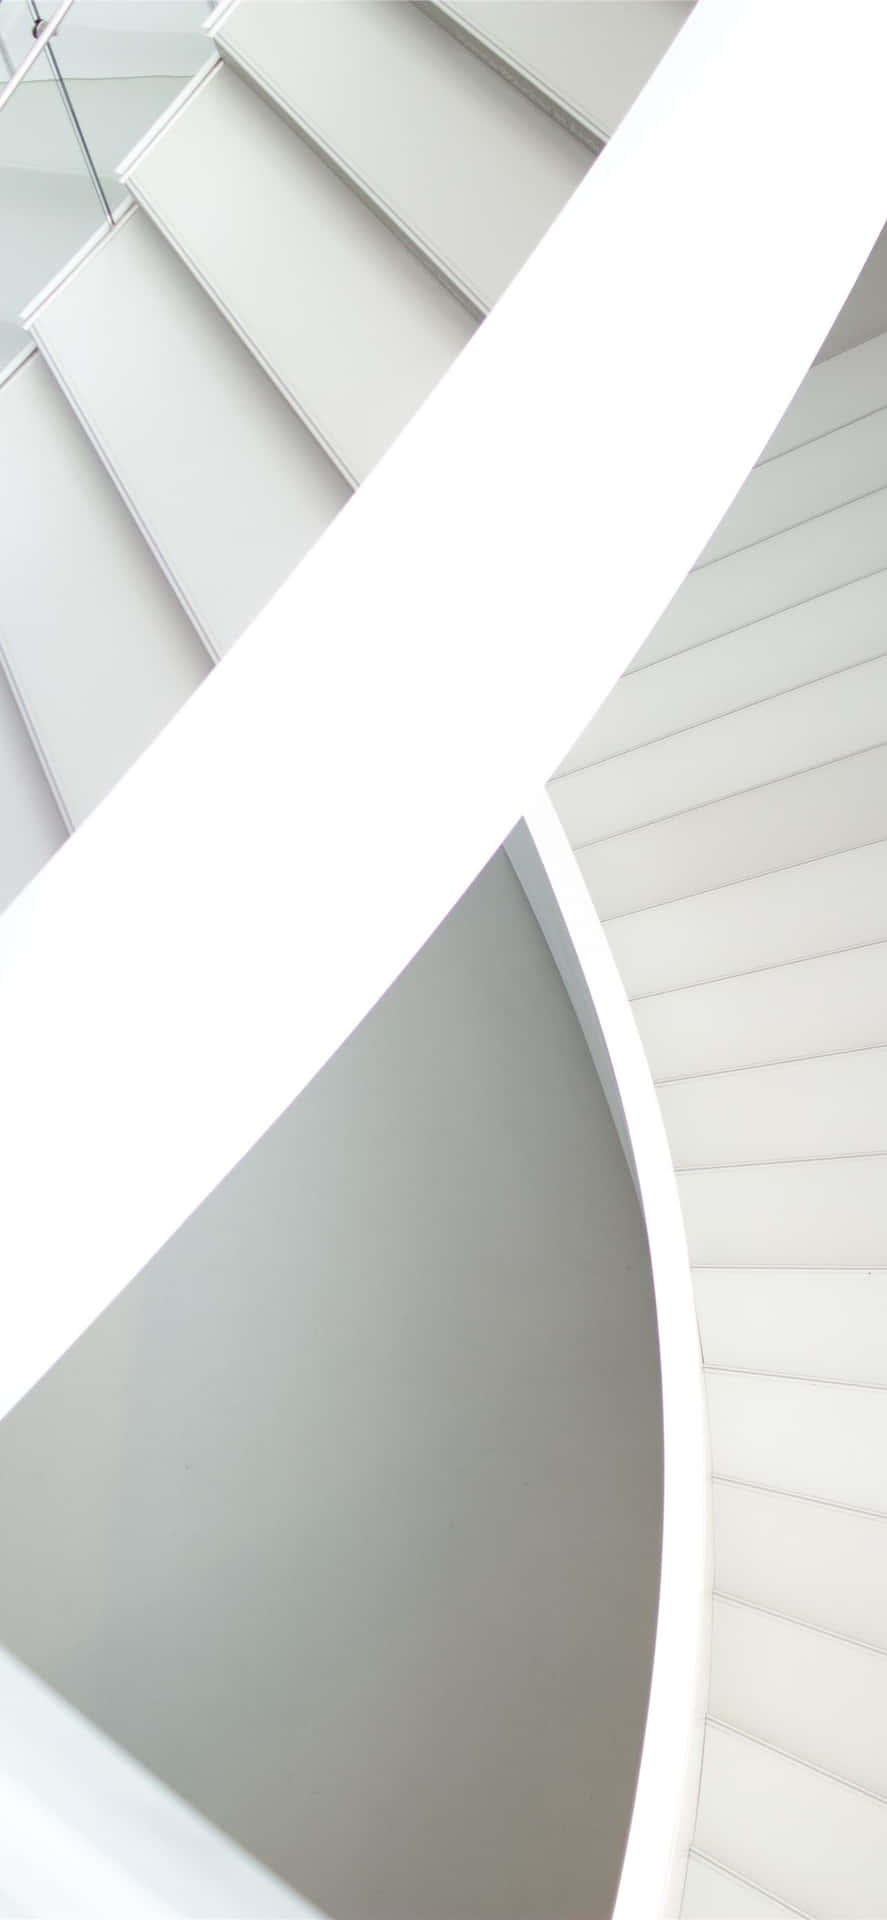 Modern Architecture White Stairs Iphone Wallpaper